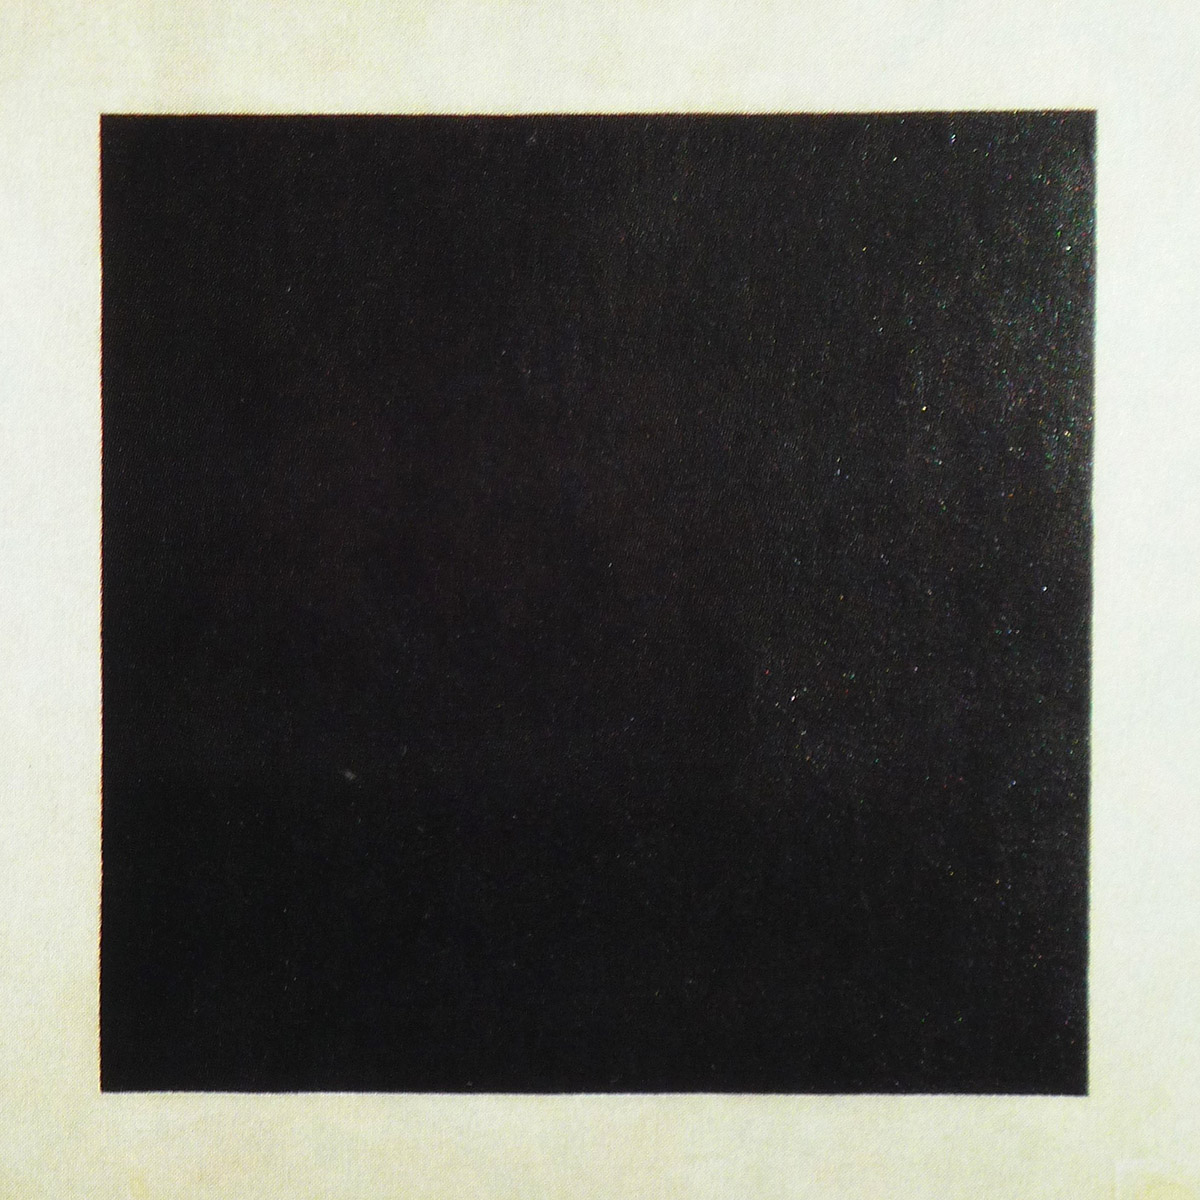 Black square on a white background, work by the Russian Kasimir Malevich,